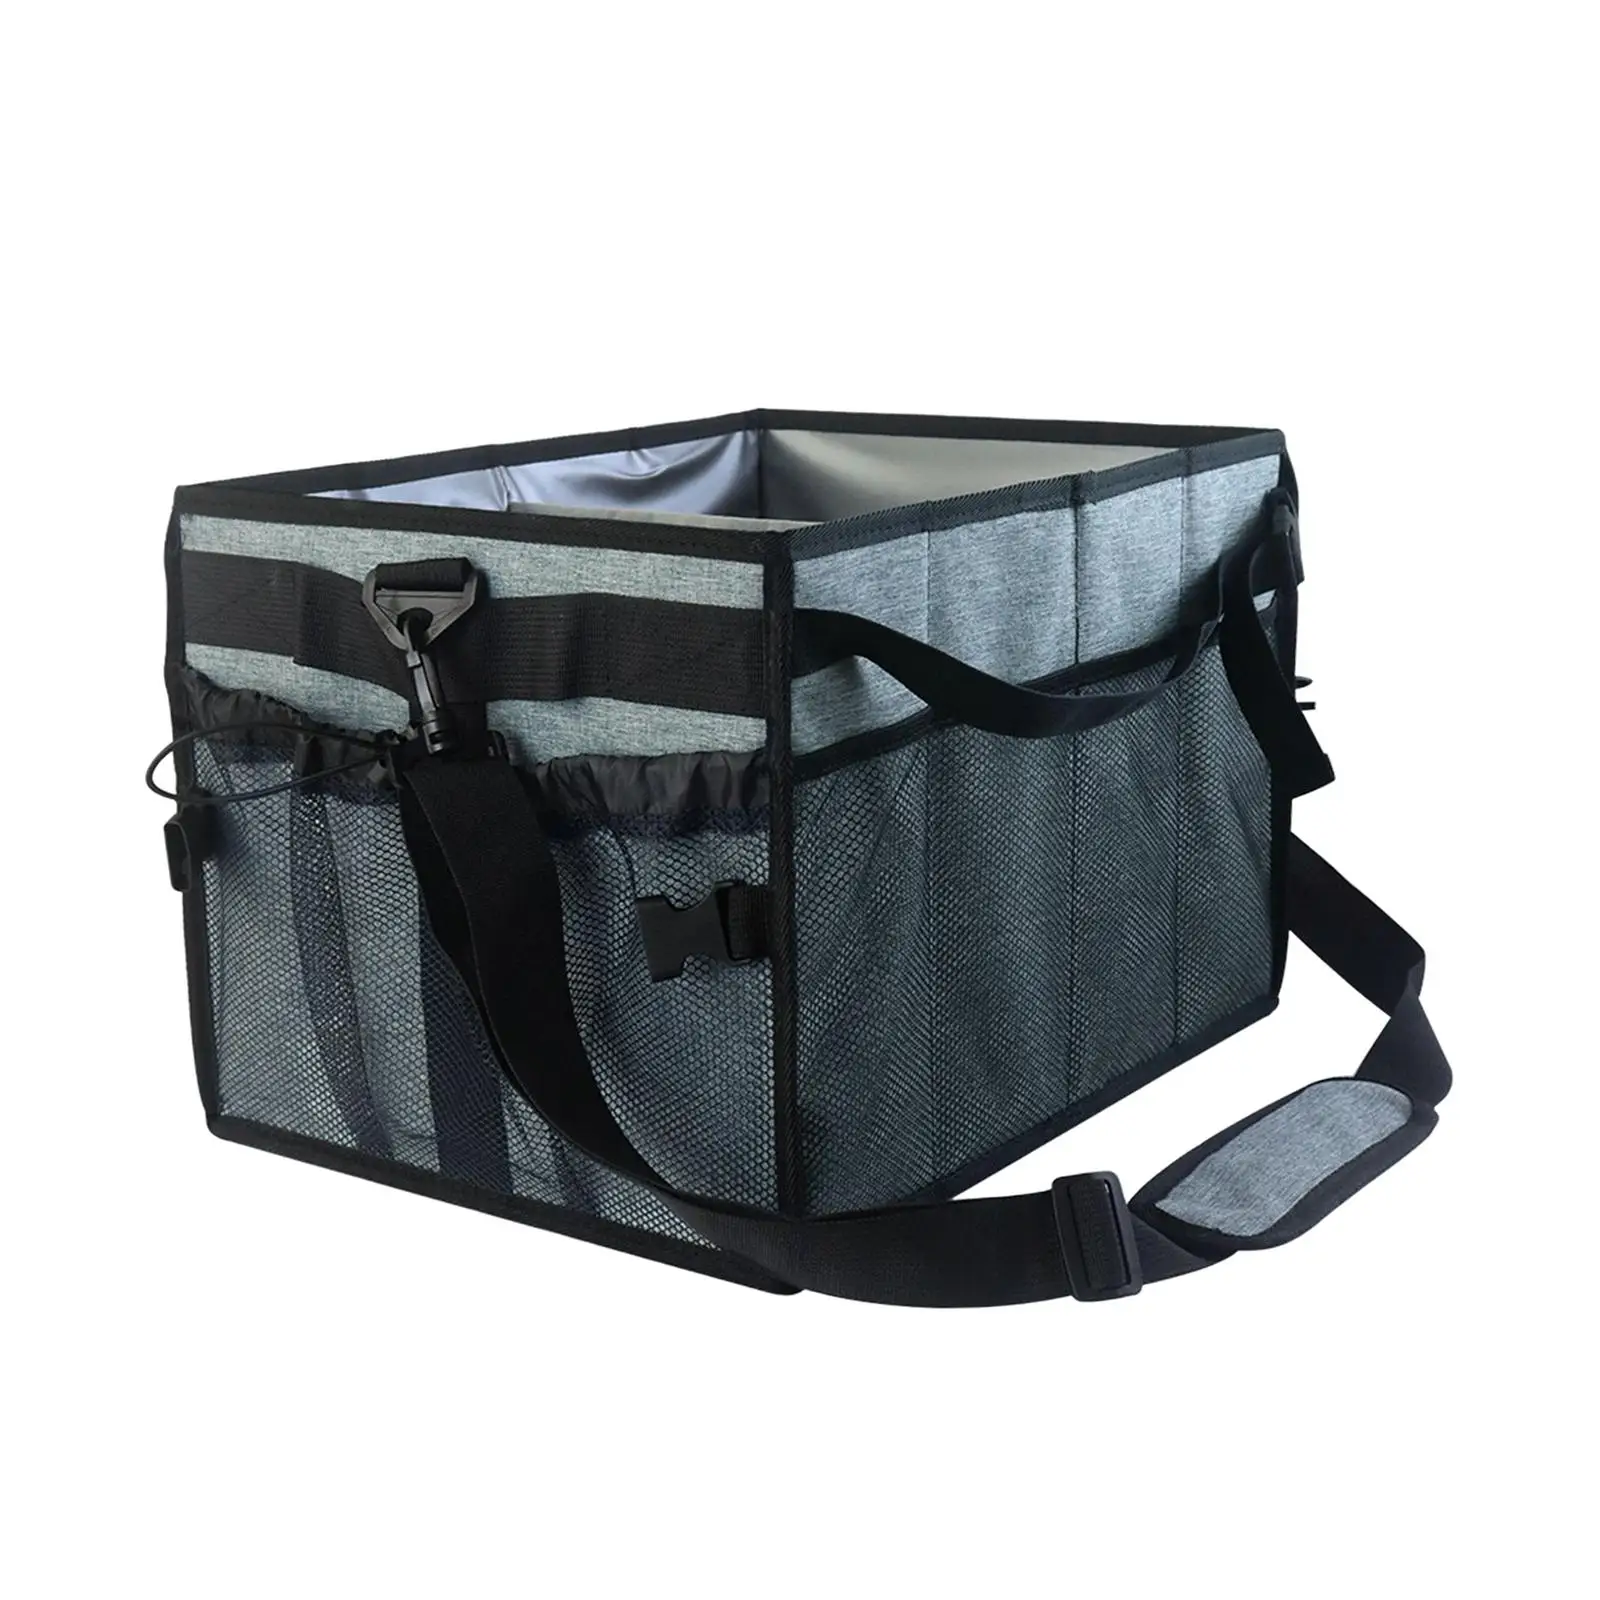 Portable BBQ Tool Storage Bag Waterproof Food Storage Tableware Carry Case Grill Tool Carrying Bag for Outdoor Grill Accessories